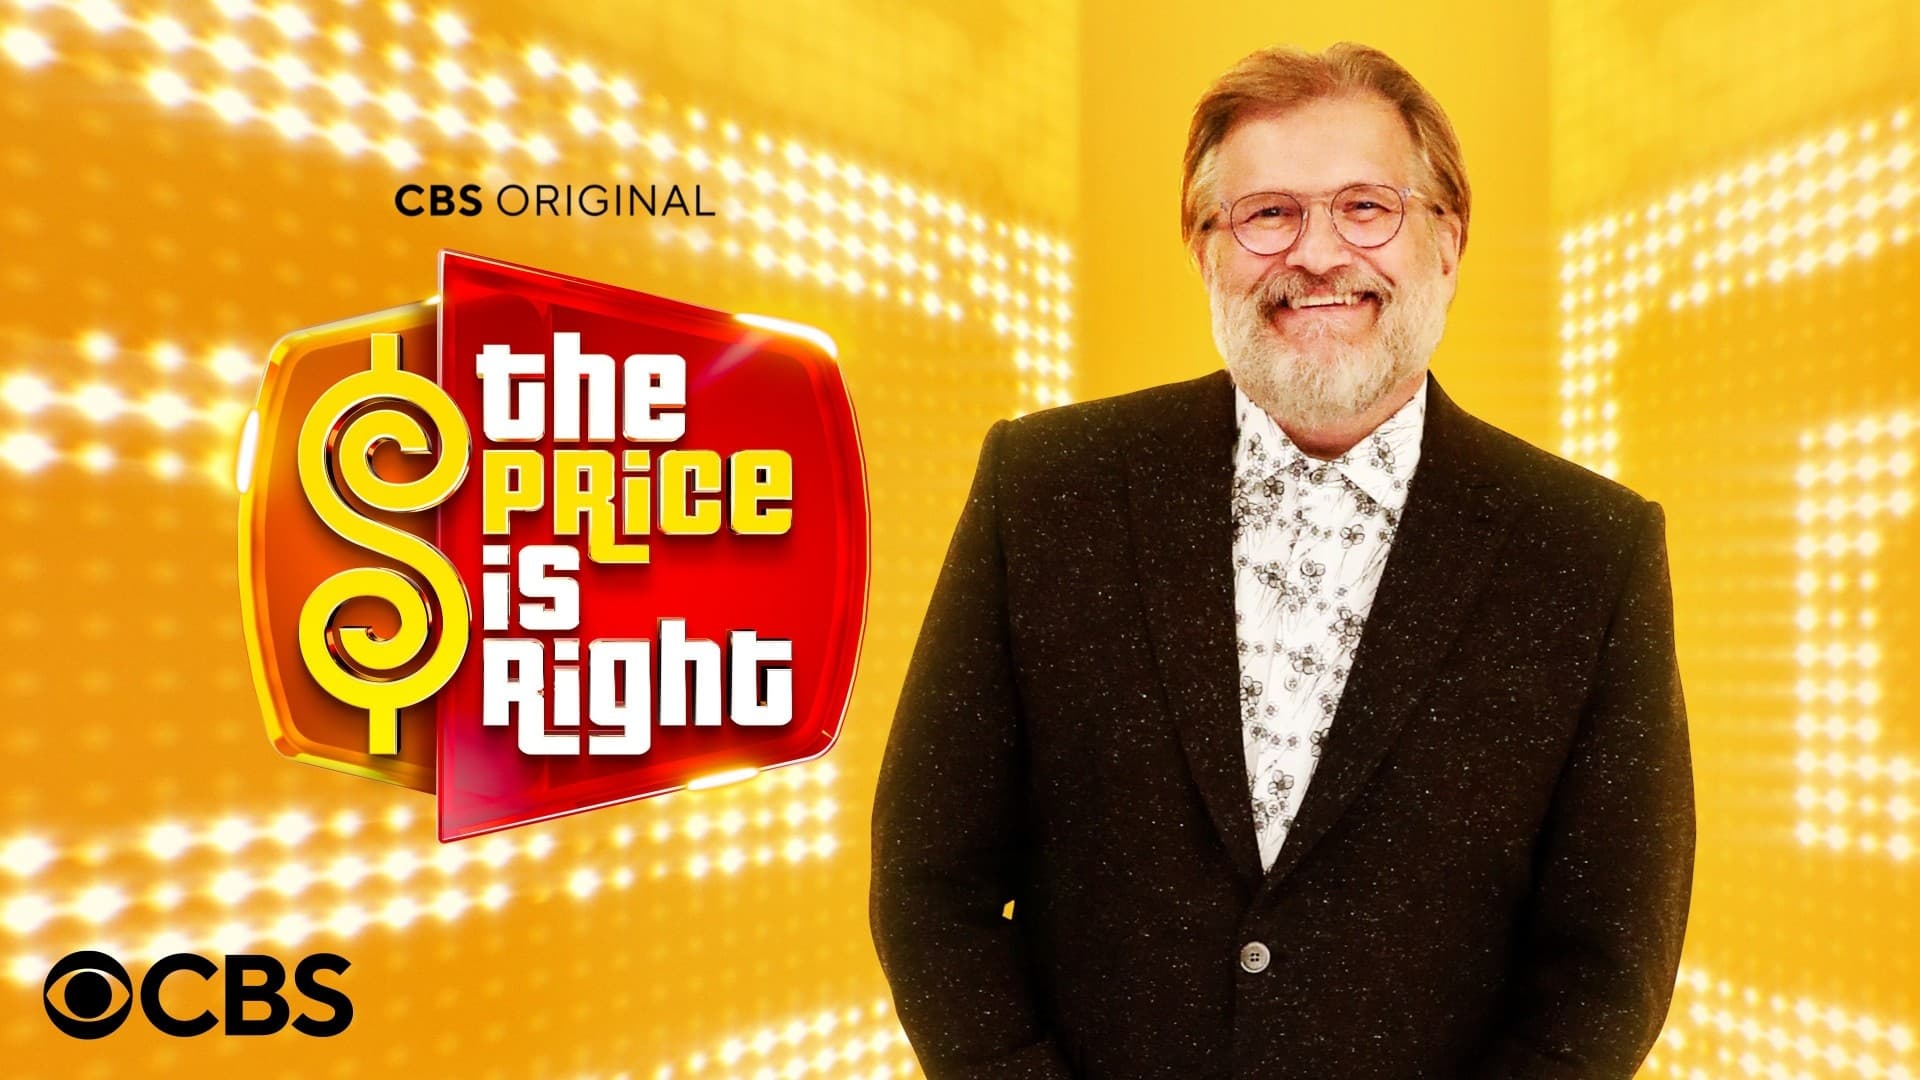 The Price Is Right - Season 1 Episode 109 : The Price Is Right Season 1 Episode 109